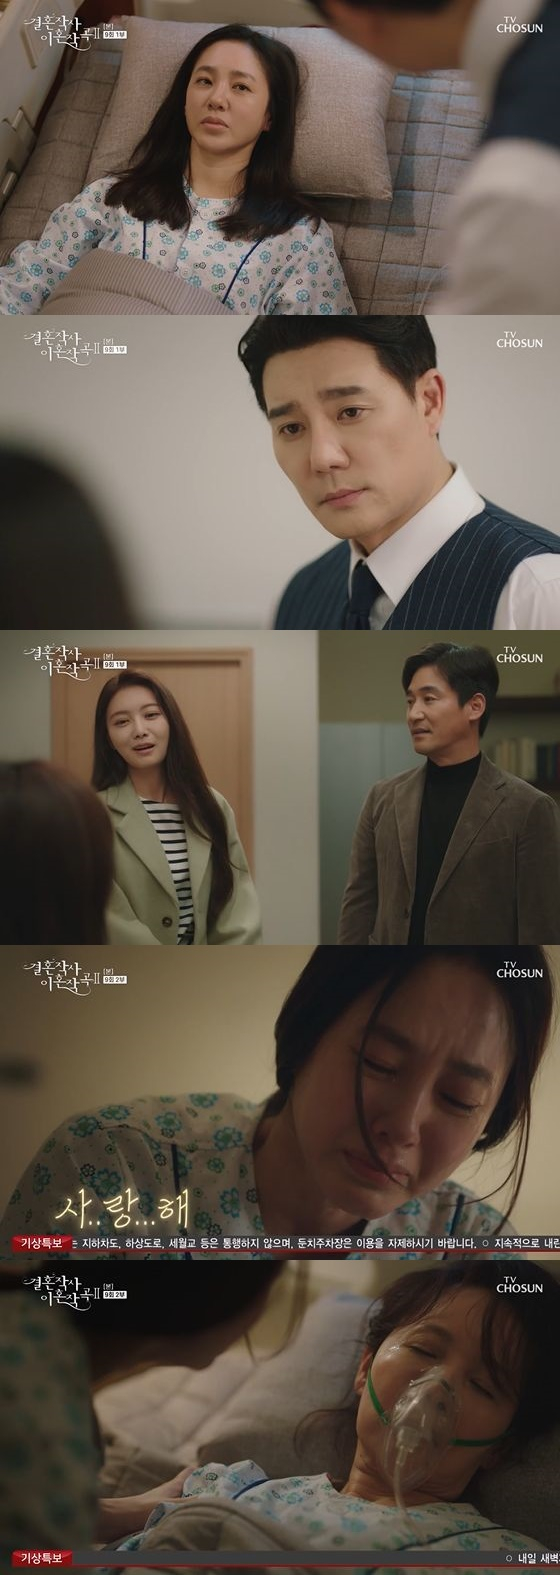 On the 10th TV weekend, Drama Drived Composition 2 of Marriage Writing (hereinafter referred to as Religion 2), a scene in which Safi Young (Park Joo-Mi) lost his words to Affairs shock was drawn.Shin Yu-shin (Lee Tae-gon) told Safi-young, who woke up, that Mo Seo-hyang (Lee Hyo-chun) said, The cancer cells have spread to the whole body and there are not many days left to live.Safiyoung accidentally witnessed the scene of her husband Shin Yusin and Amy (Song Ji-in), so she refused to touch and showed tears in front of Moseo.Before entering the room, Shin Yu-shin said, My mother was worried about my grandmother and I felt a lot down. She told her daughter, Cinzia Monreale (Park Seo-kyung), to support Safi Young.But Safiyoung was shocked by the silence. Cinzia Monreale was crying in surprise.Lee Si-eun (Jeon Soo-kyung) and Bu Hye-ryong (Lee G.) also heard from Shin Yu-shin about Safi-youngs hush-hush.I will be surprised, but have you heard that you have been speechless with that feeling of self-defeating? After that, Safi Young headed to Amys room, which he hugged with his husband, but he found out that Shin Yusin had moved to another hospital with his hand first.Safi Young realized that the person who called him boyfriend in the meeting with Amy was Shin Yusin.Safiyoung kept the bed of Moseo-hyang throughout the hospital, and Safiyoung was in a fever with his fingers writing Im sorry, forgive me, I love you on the bed where Moseo-hyang lies.However, Moseo Hyang eventually changed his fate in his bed and added to his sadness.Meanwhile, Park Hae-ryun (played by Jeon No-min) and Nam Ga-bin (played by Lim Hye-young) went to Amys hospital at Song Won (played by Lee Min-young).Nam Gabin suggested to Park Hae-ryun that one of the members of the Three Musketeers was hospitalized.Park Hae-ryun recalled seeing Amy in the riding room when she met in the room. After that, Park asked Amy, Do you have a lover? And Amy could not answer.I asked him if he was meeting a man who had a lot of age differences.